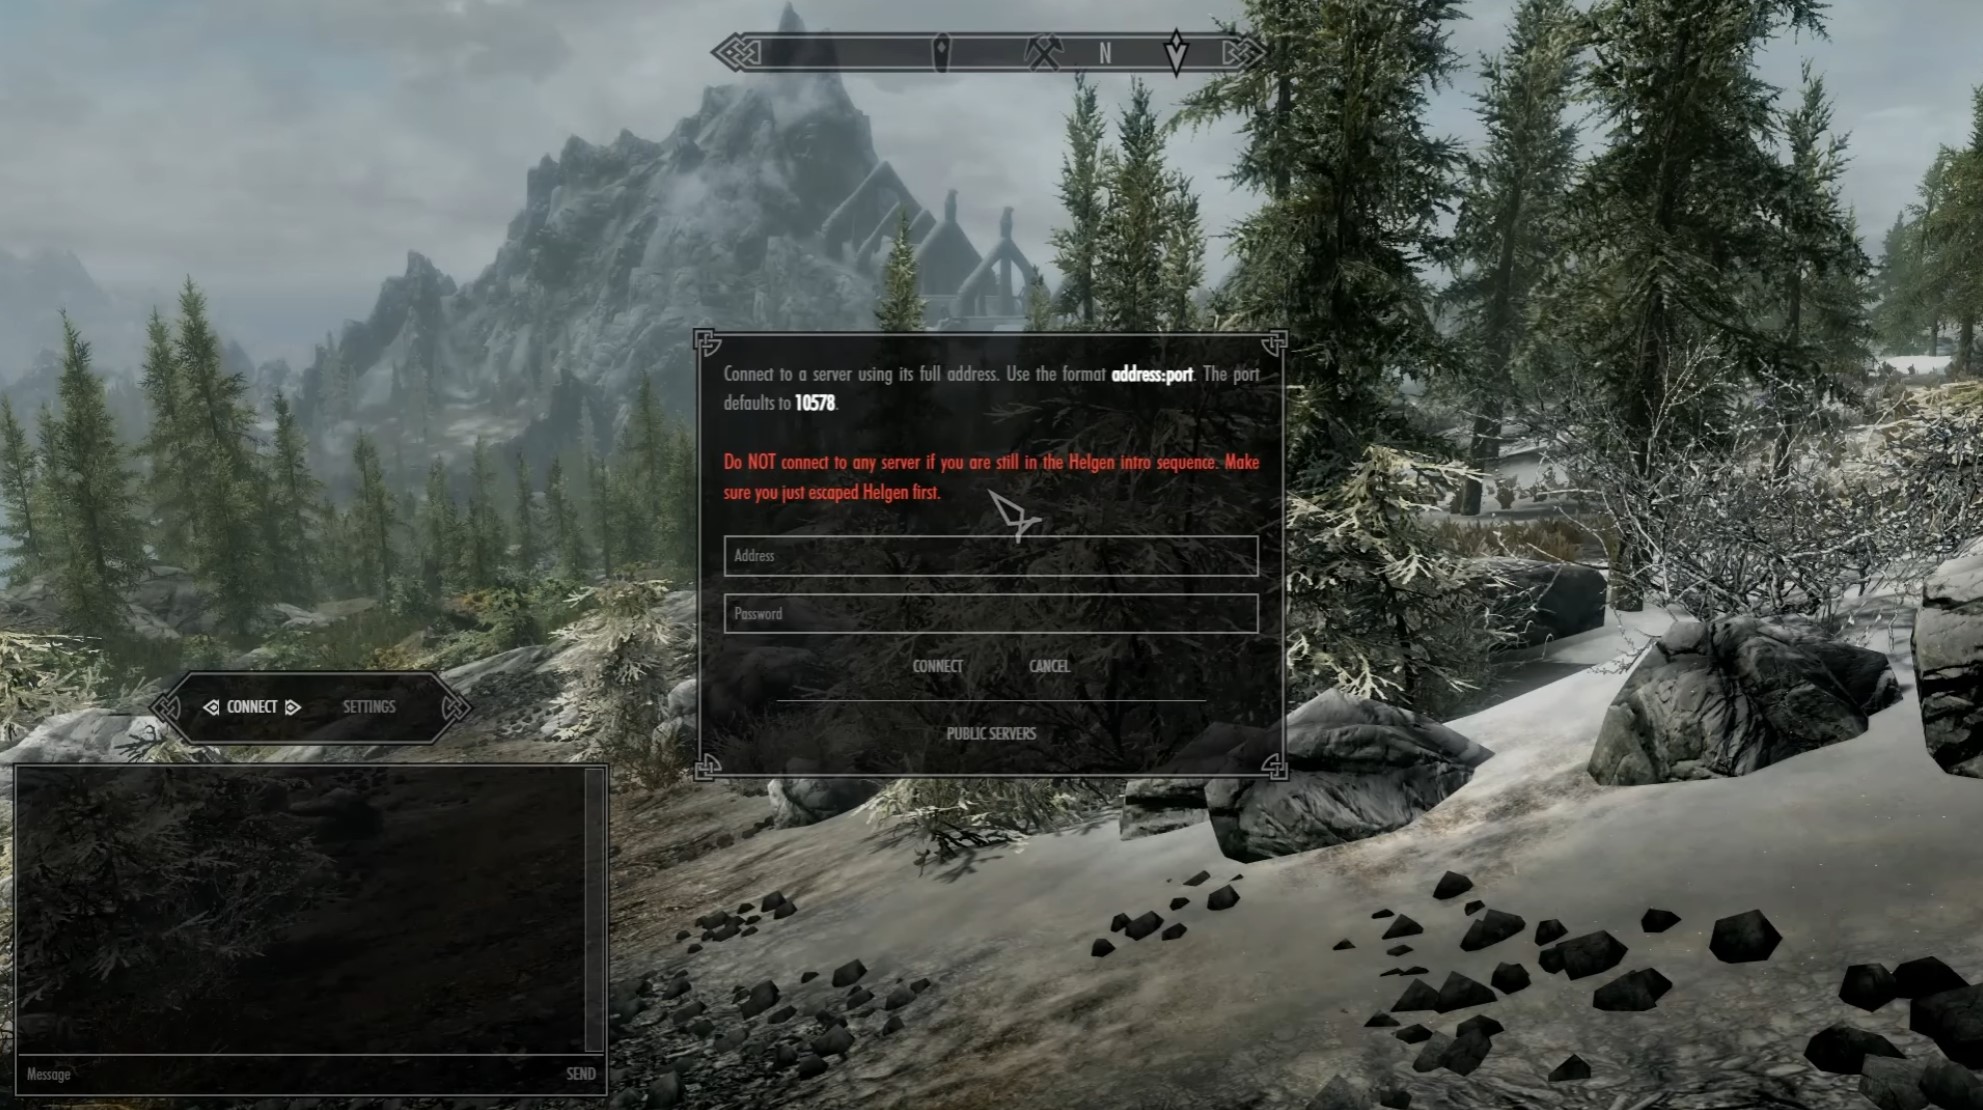 Connecting to a Skyrim Together server.